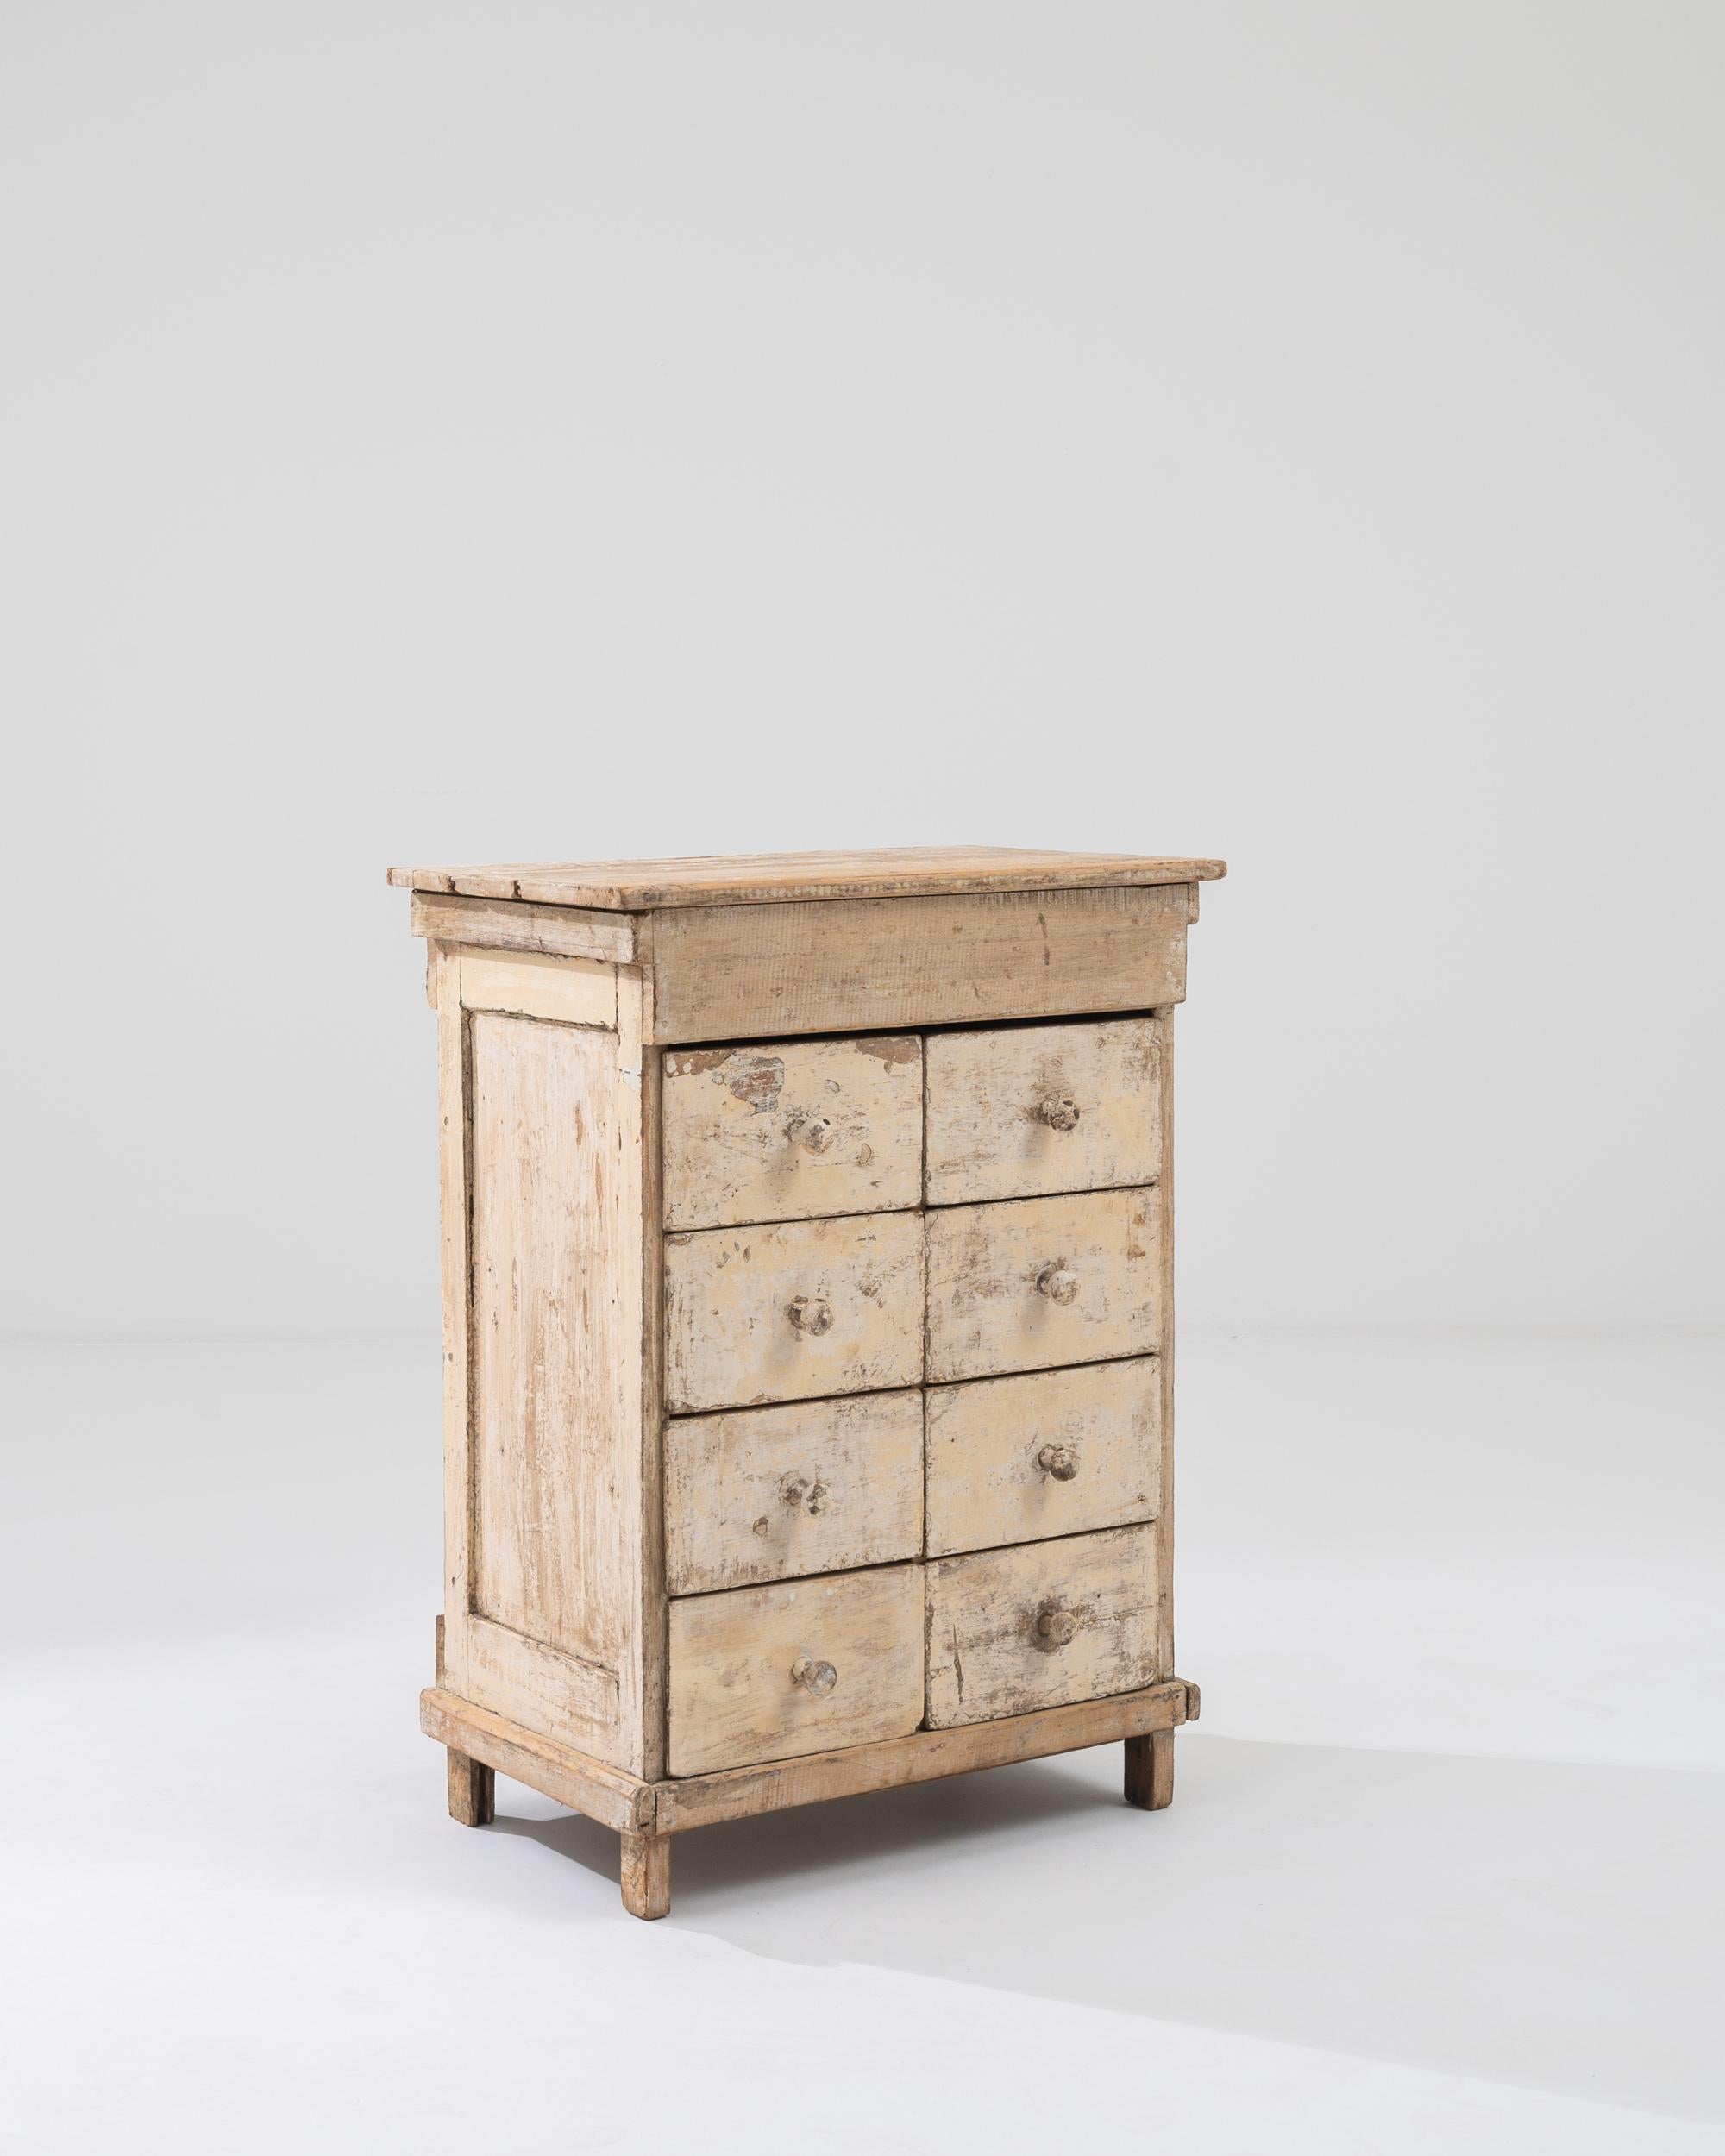 A wooden chest of drawers made in France circa 1900. This rustic and simple drawer chest is a charming picture of resiliency, its weathered surface telling the story of its age. A creamy beige and soft brown patina touches each of its sides and